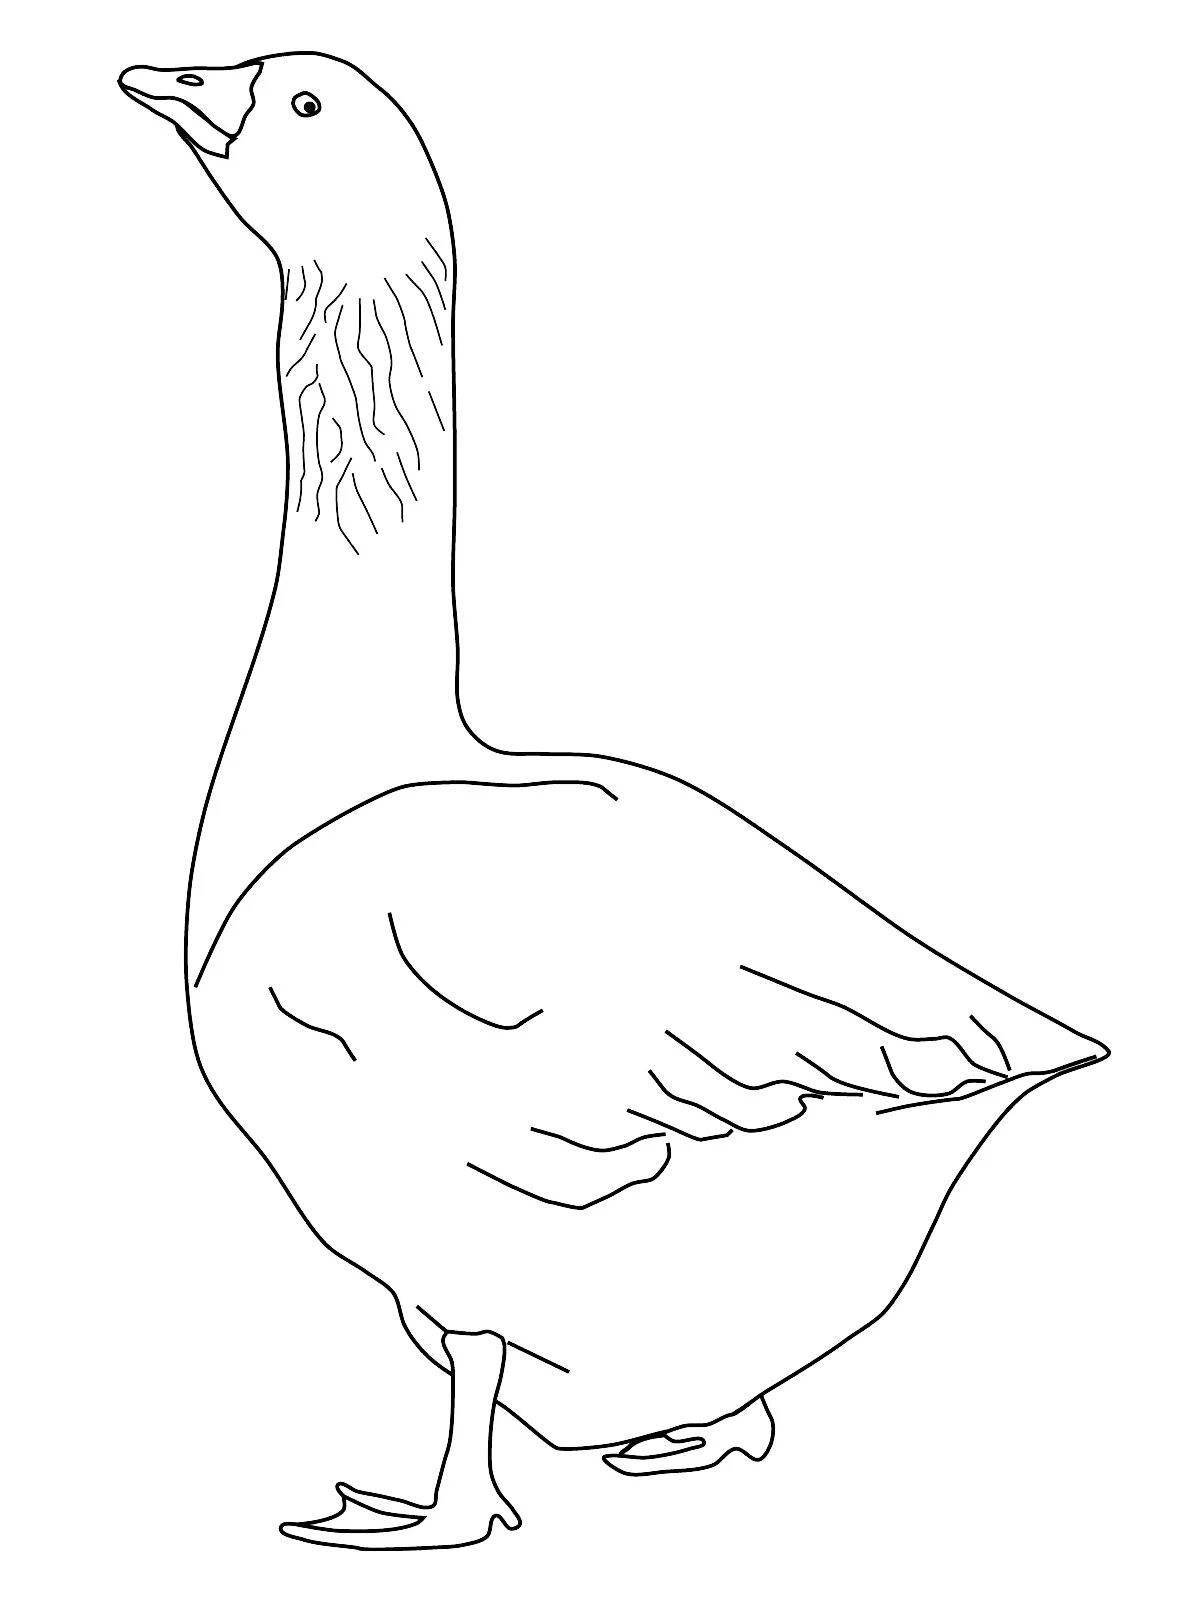 Fabulous goose coloring pages for kids